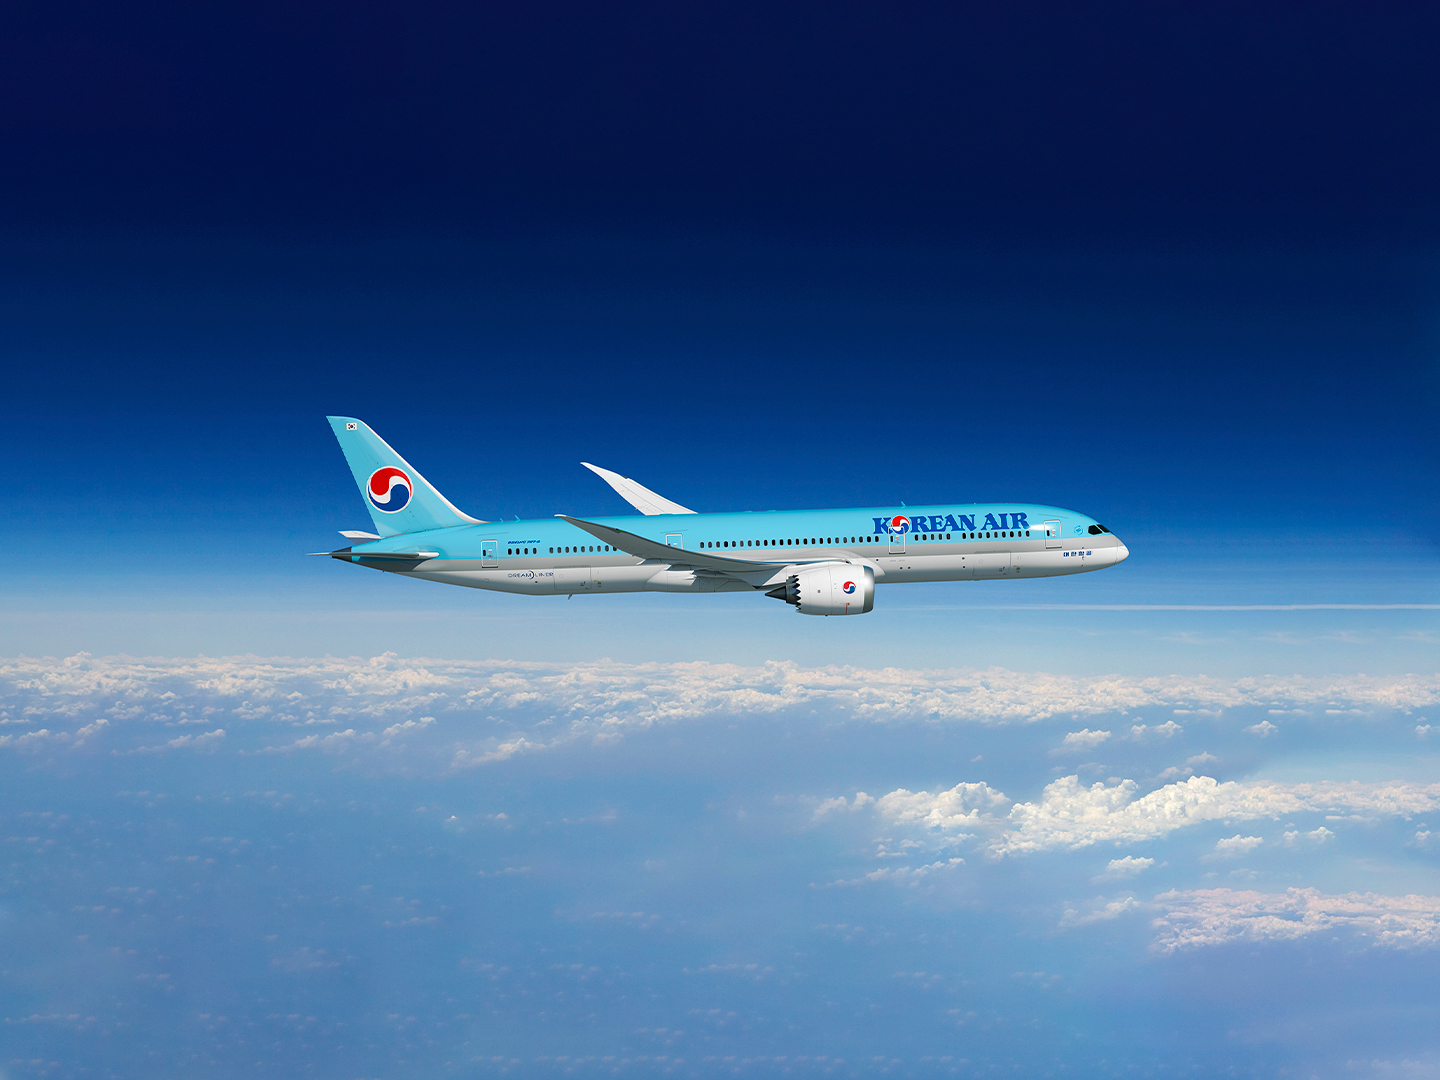 Fly with Korean Air